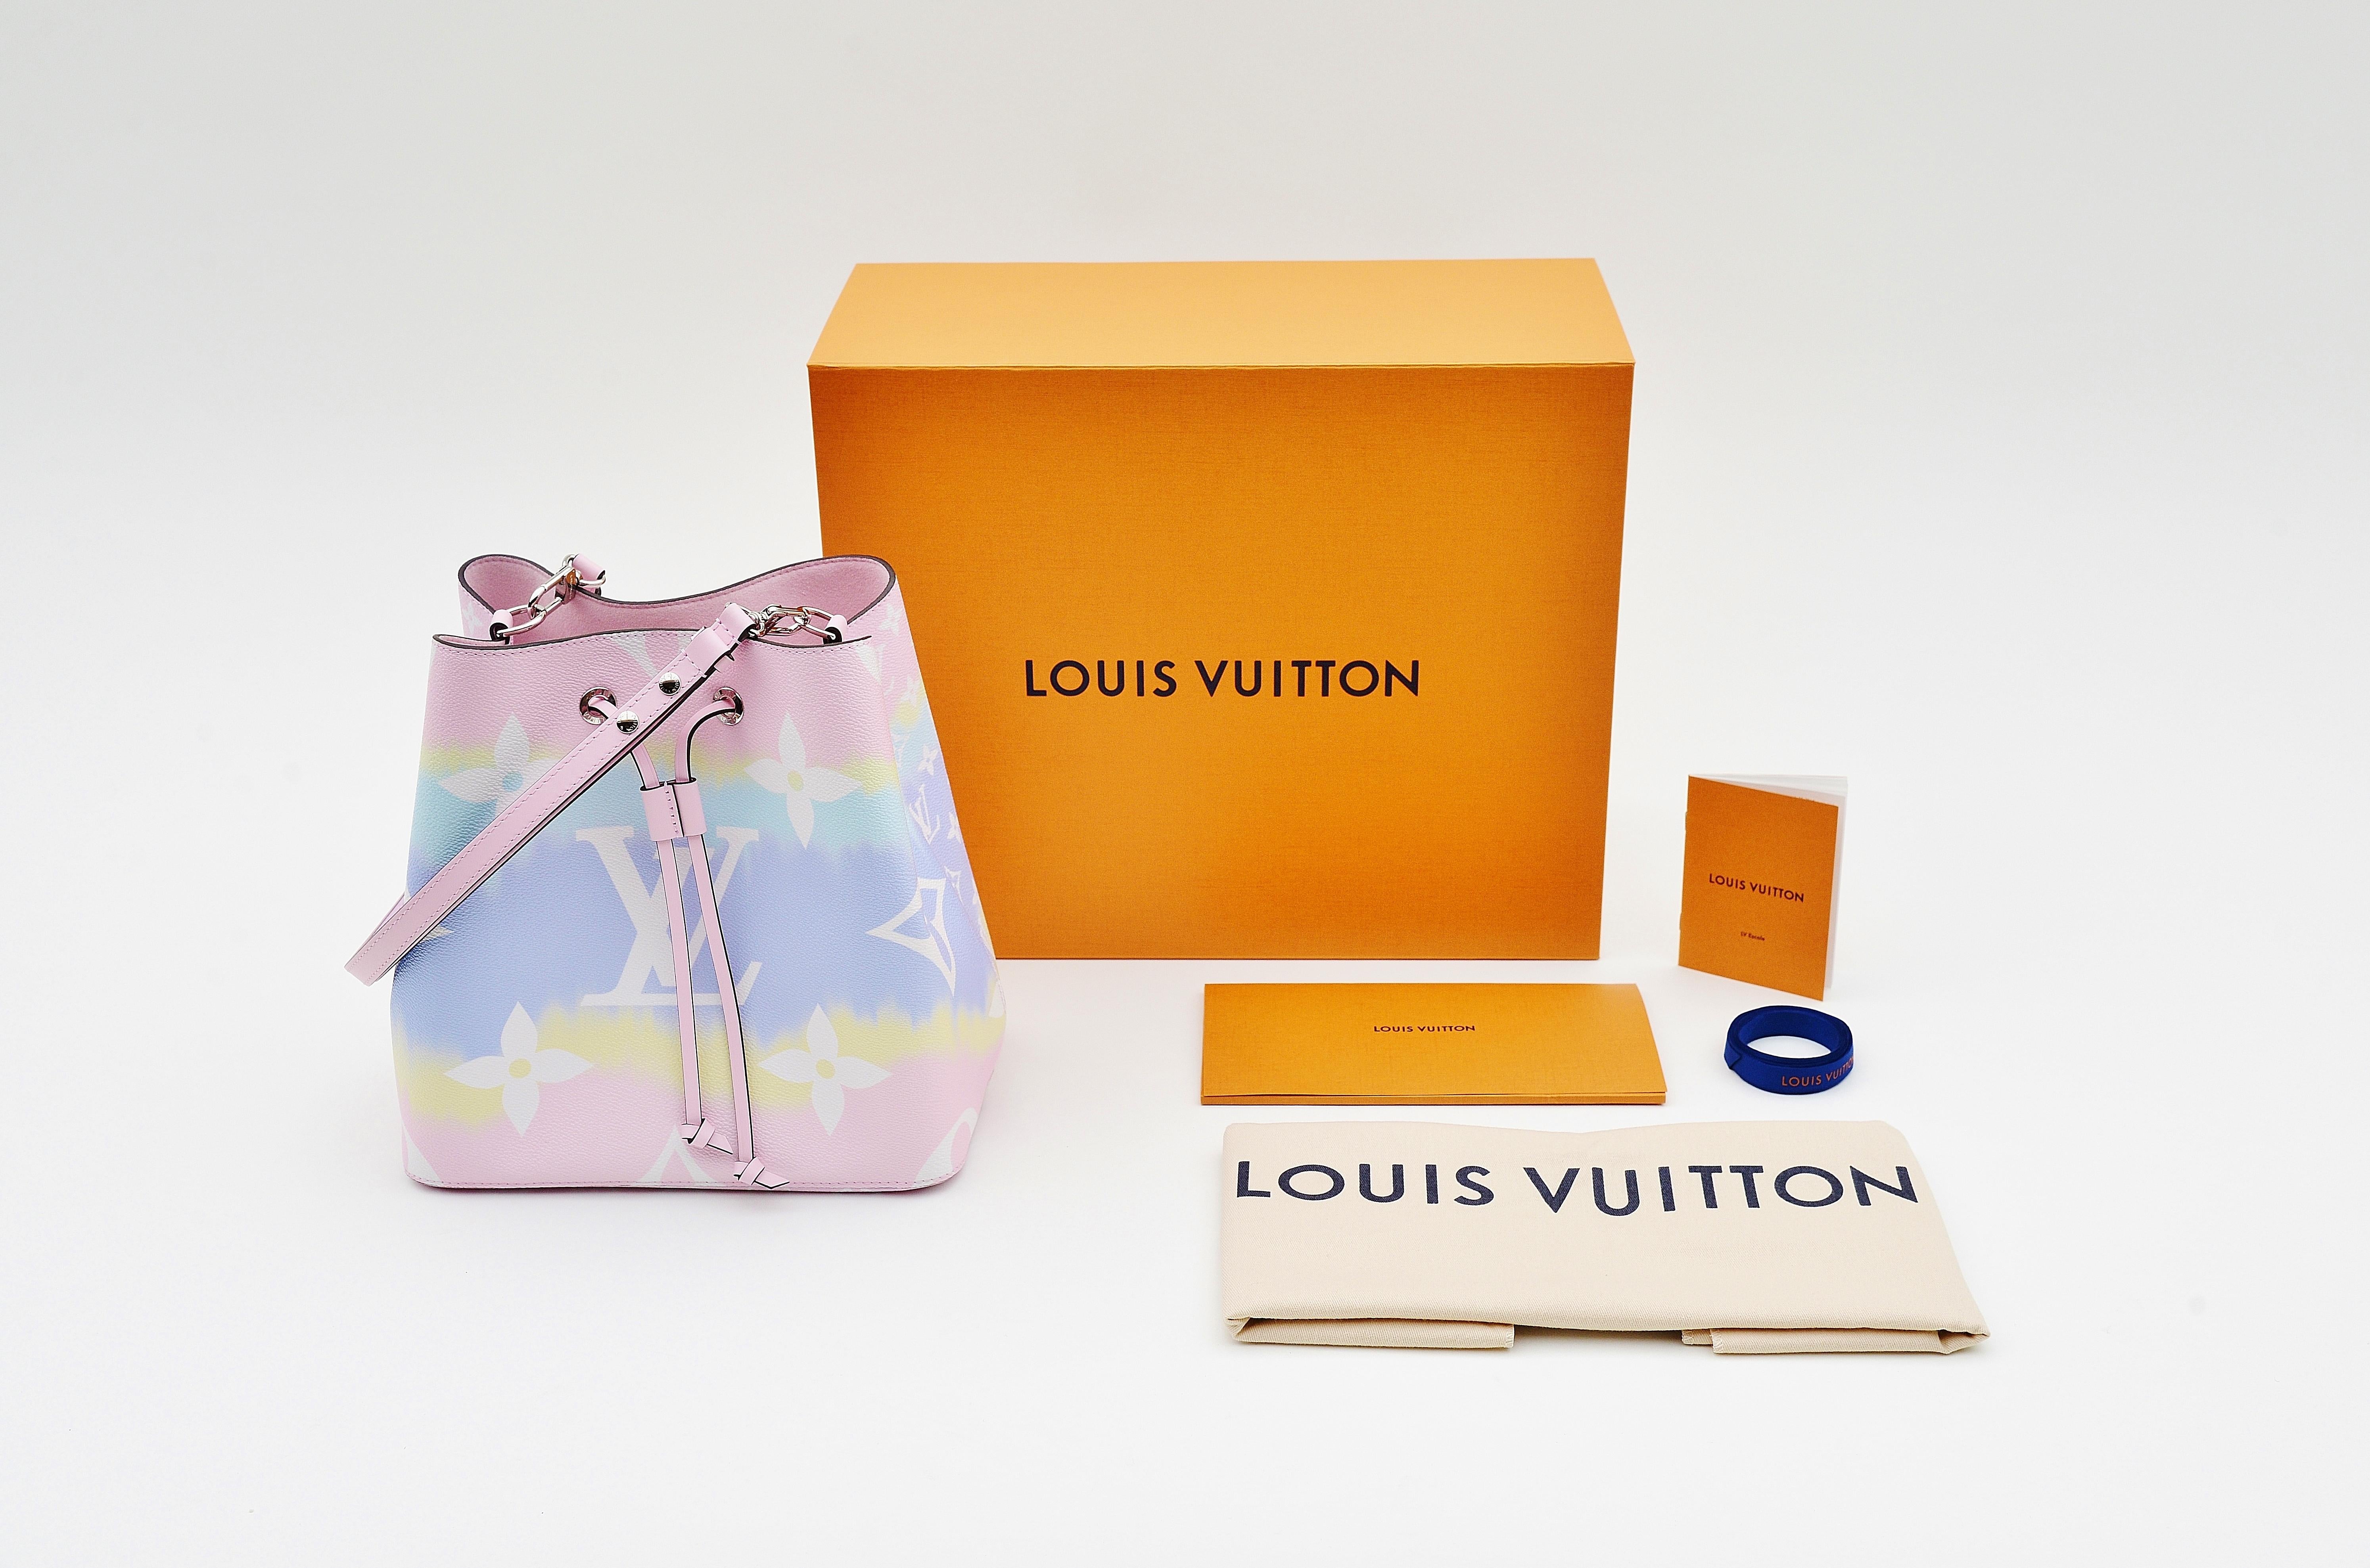 From the collection of Savineti we offer this Louis Vuitton NeoNoe:
-	Brand: Louis Vuitton 
-	Model: NeoNoe
-	Year: 2020 (Sold Out Summer Collection) 
-	Code: SP0290
-	Condition: NEW (unused)
-	Materials: leather, canvas, silver-color